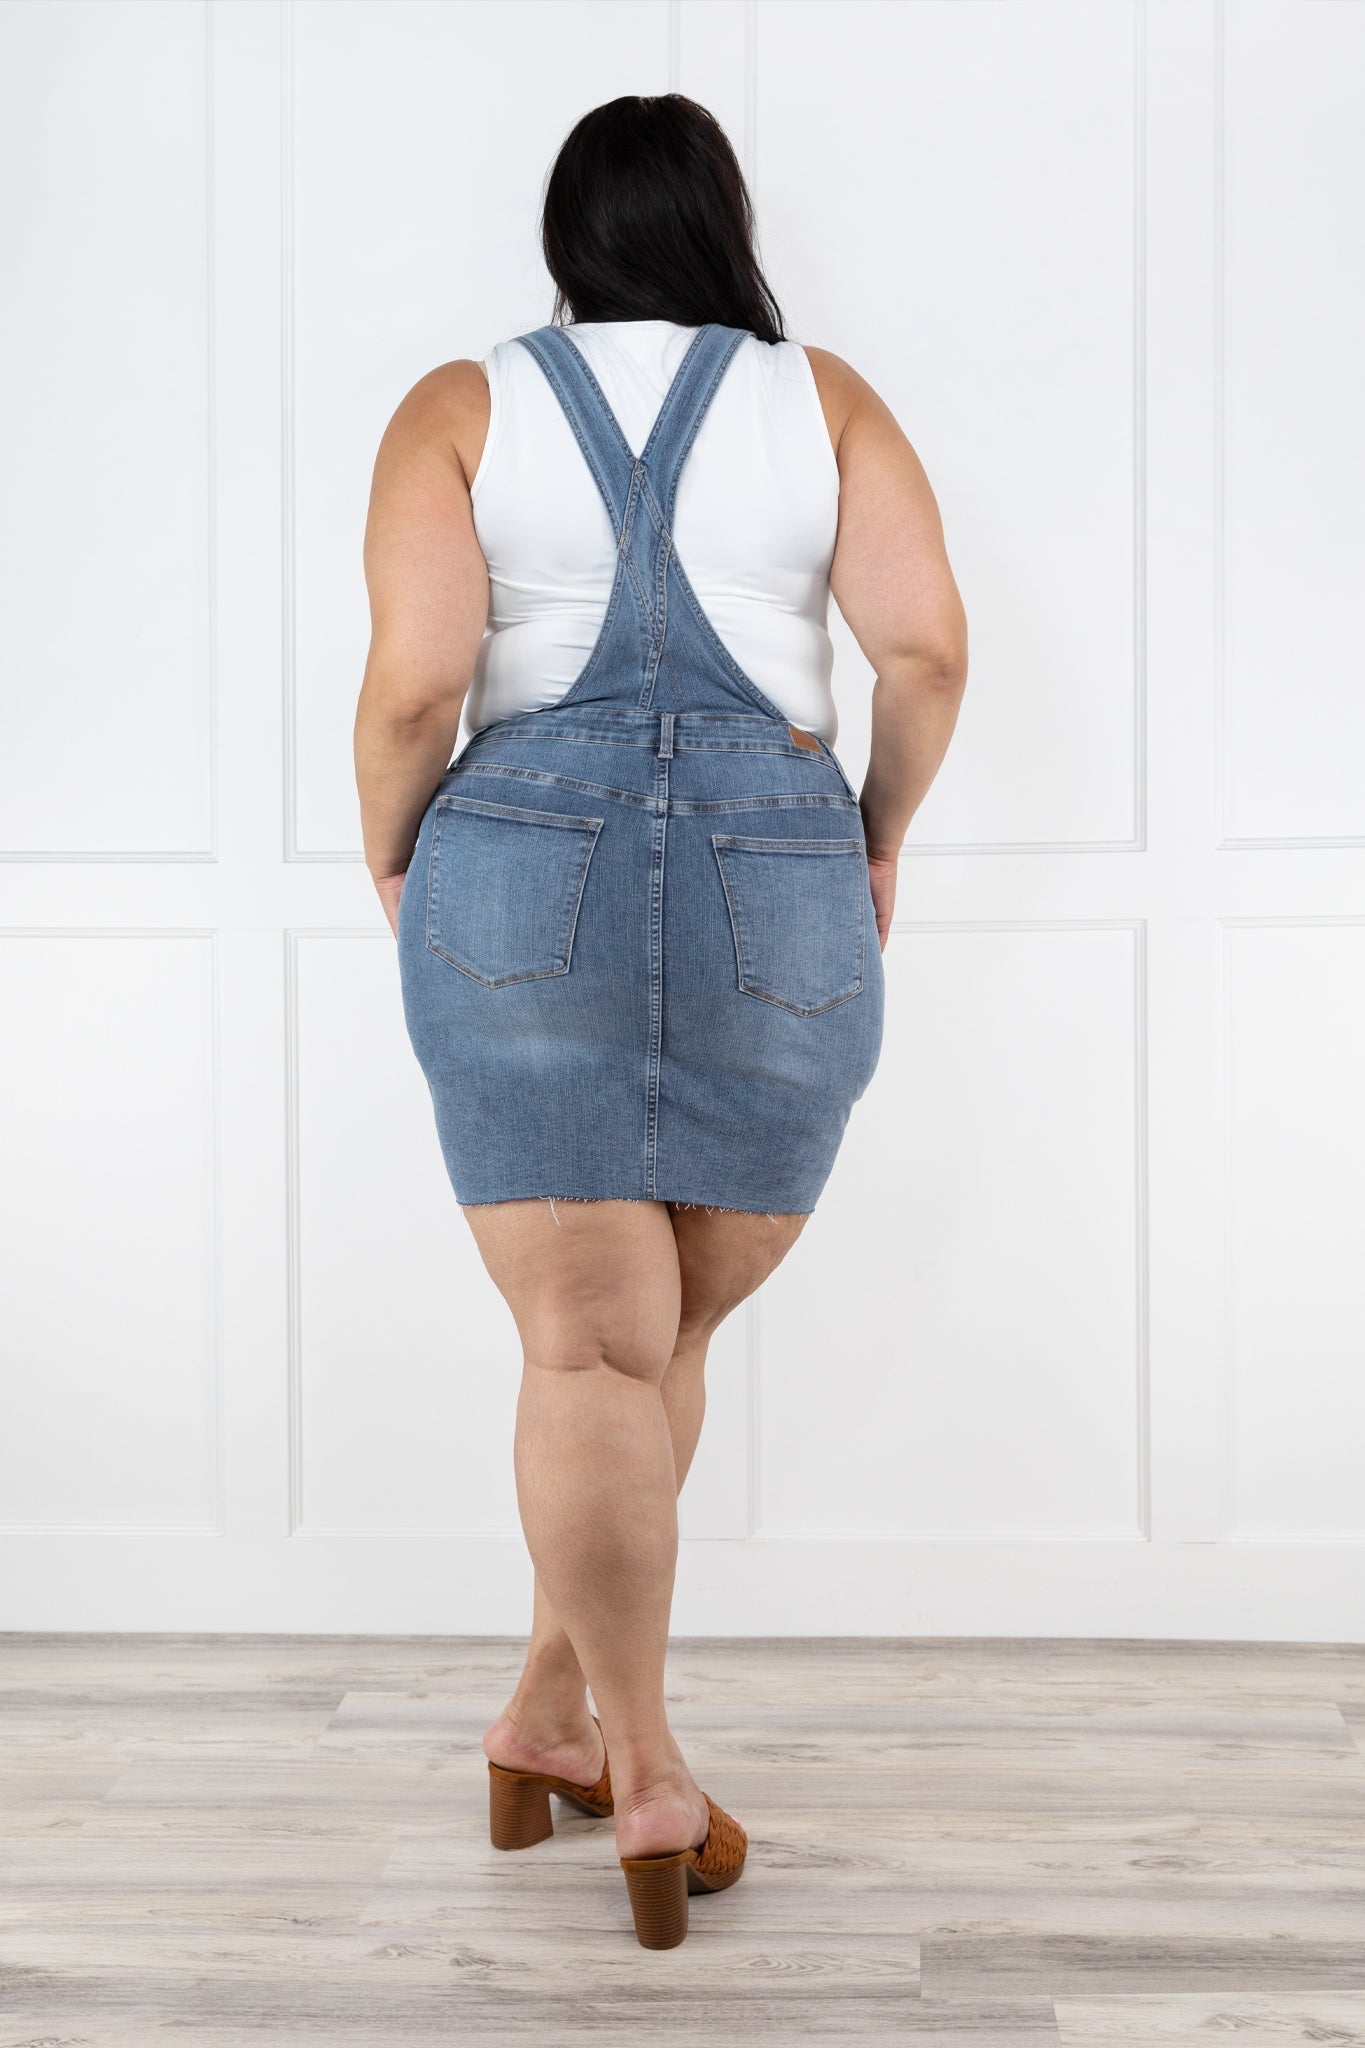 Live In The Sunshine from Judy Blue: High-Rise Denim Overall Skirt